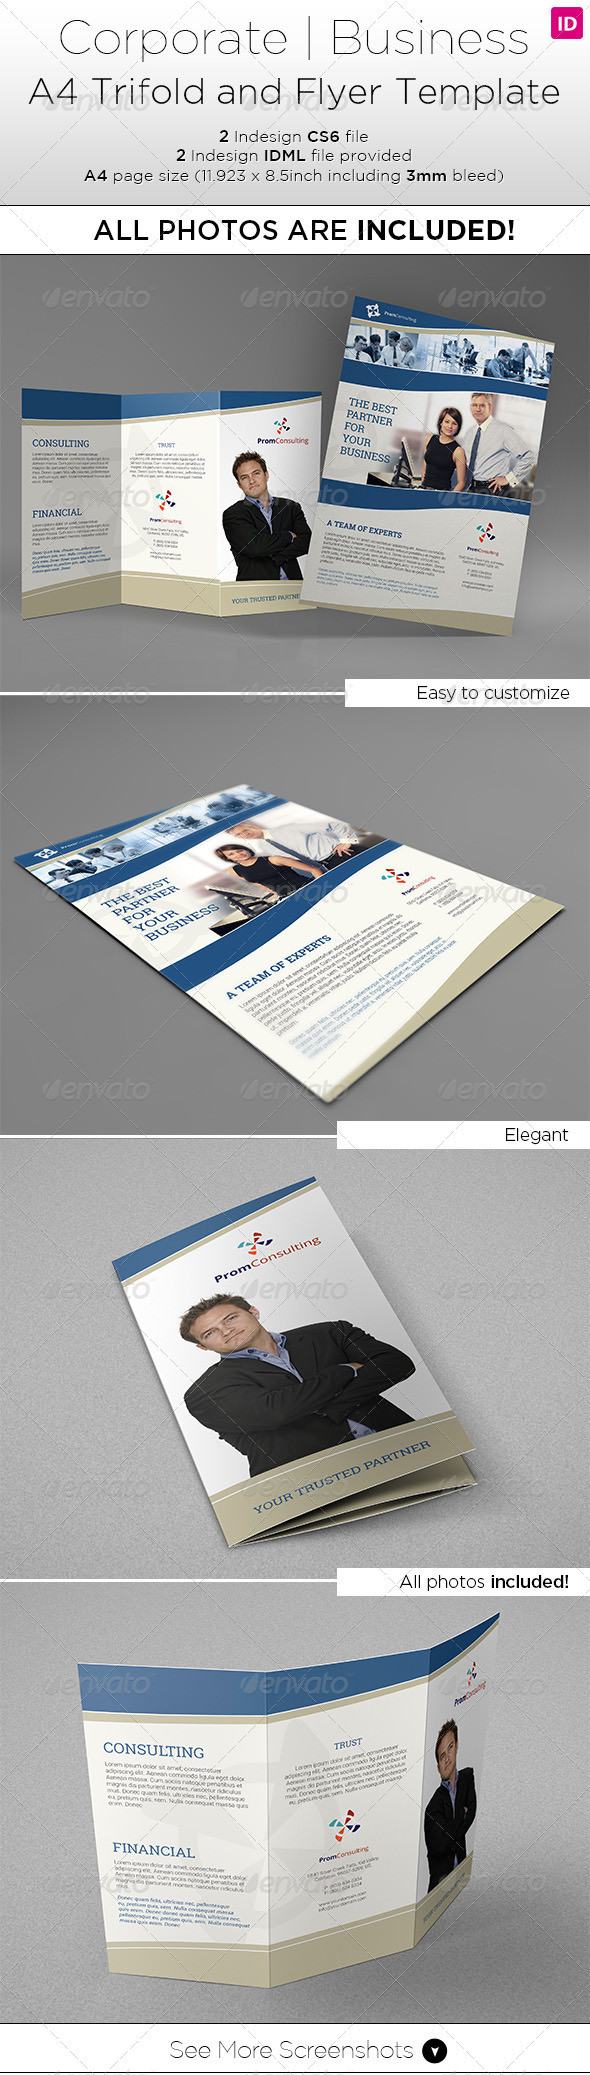 A4 Trifold & Flyer Template - All photos included